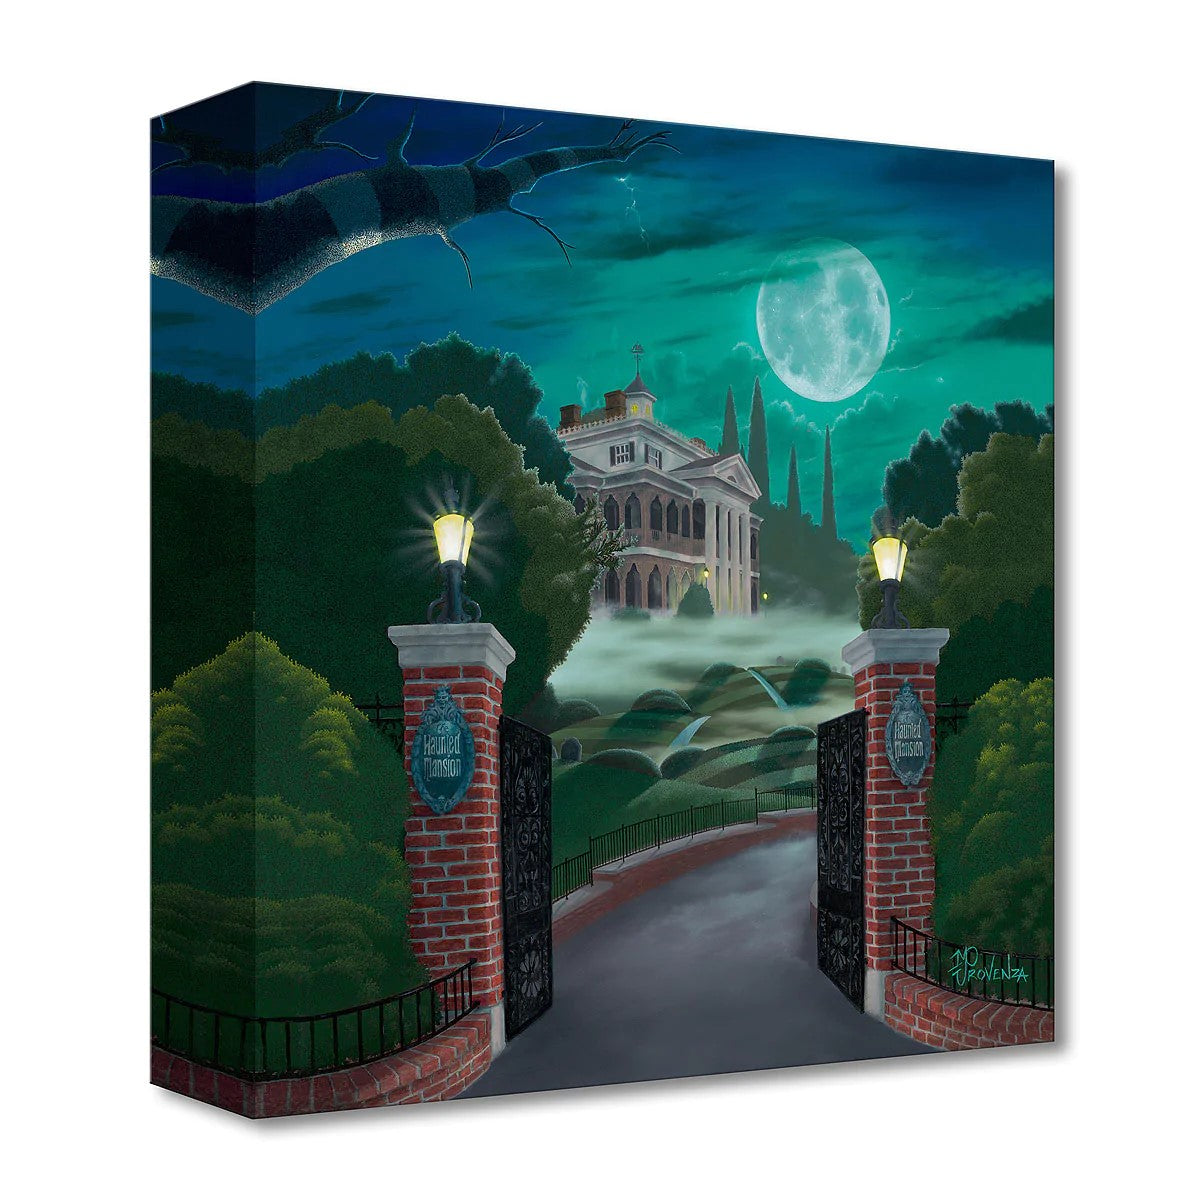 Welcome to the Haunted Mansion by Michael Provenza inspired by The Haunted Mansion